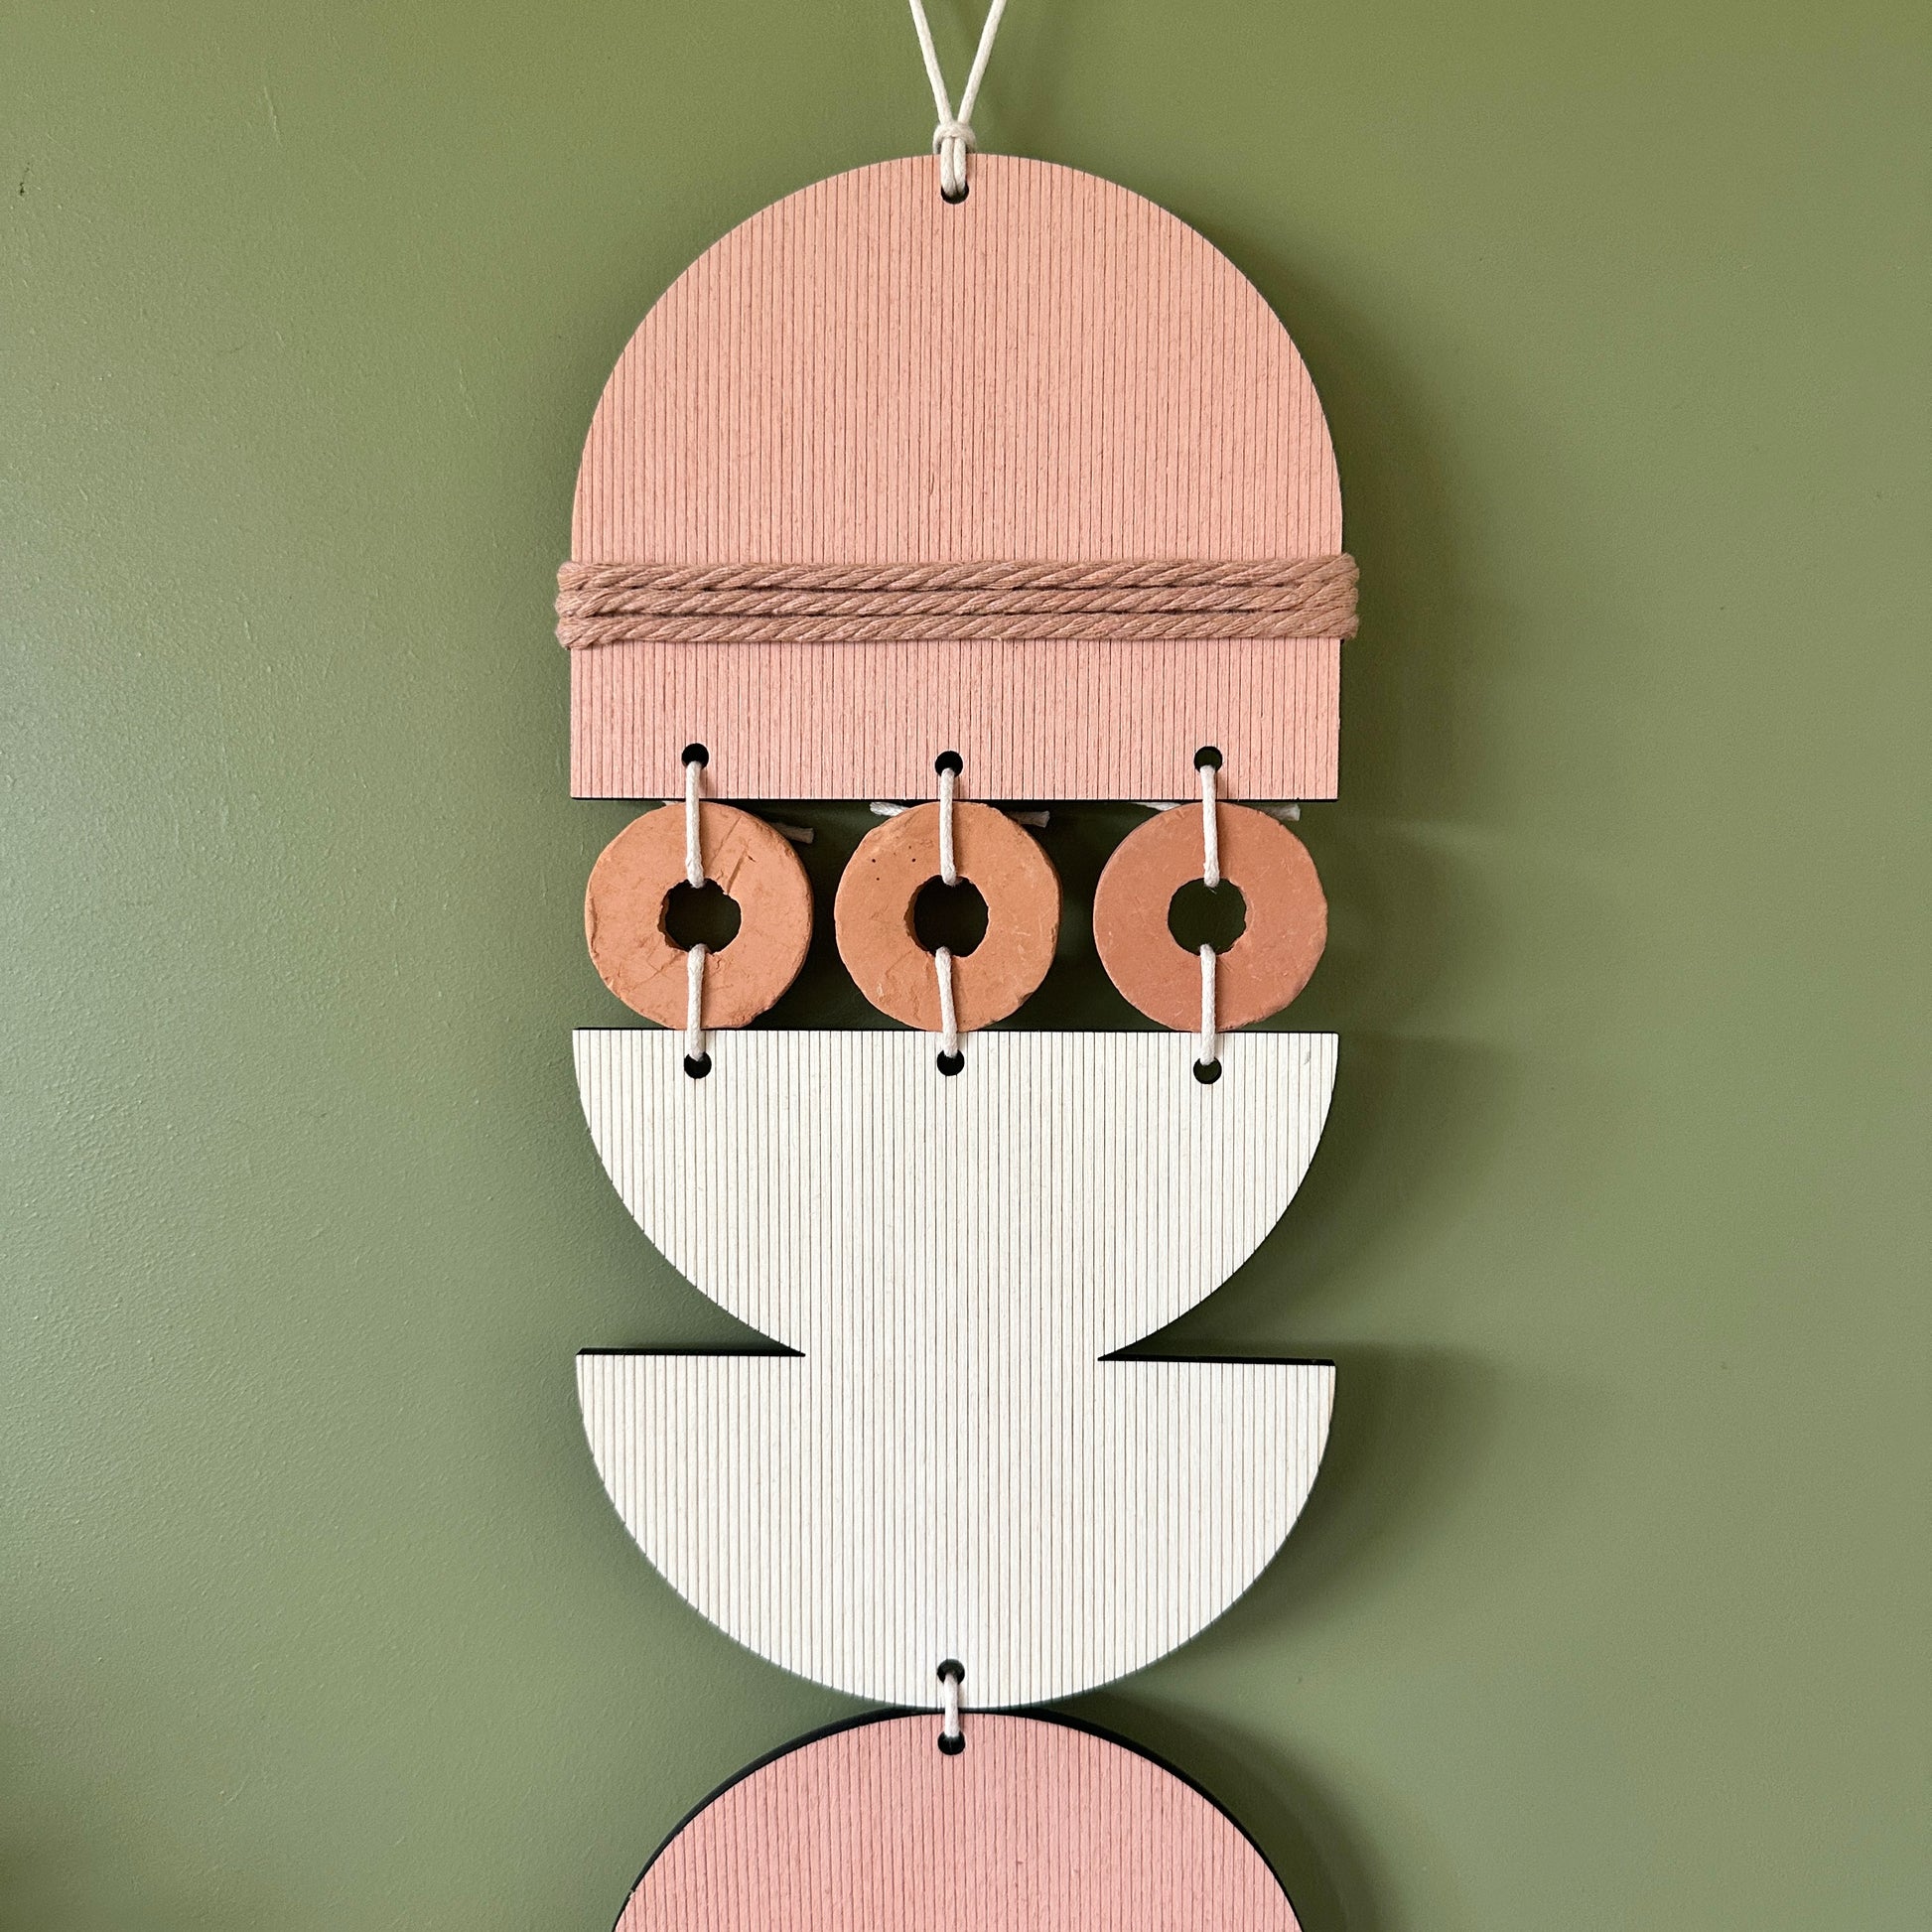 A bohemian style geometric wall hanging made from plywood part painted in pink and part left wood. Cut in semi circles and circles. With terracotta ceramic discs and pink yarn to add texture to the piece. 60cmL x 12cmW